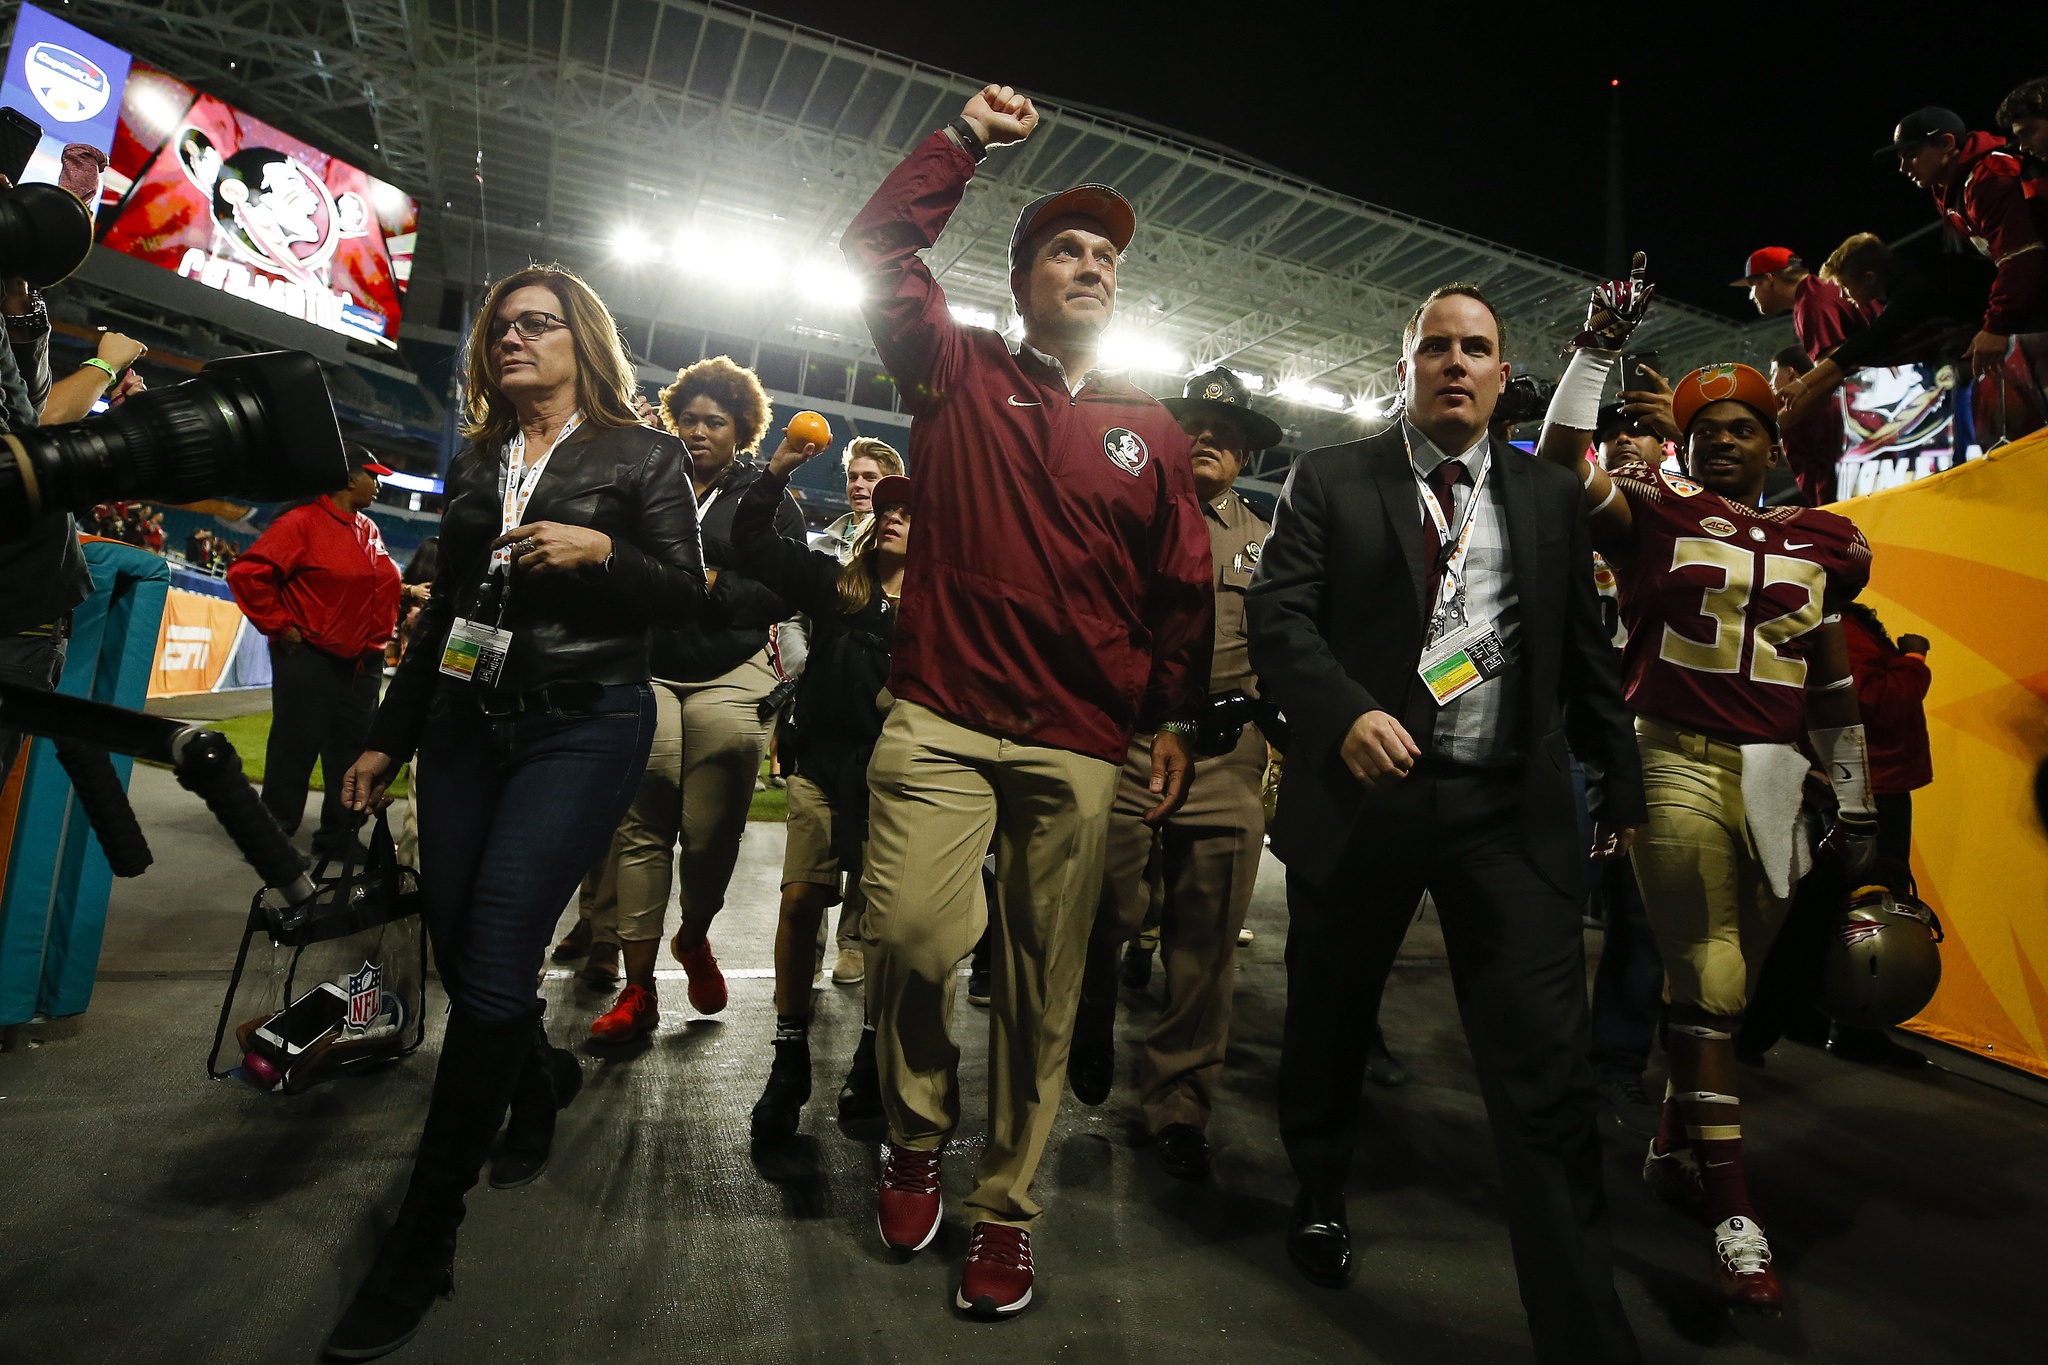 Dec 30, 2016; Miami Gardens, FL, USA; Florida State Seminoles head coach Jimbo Fisher (center) walks off the field after a game against the Michigan Wolverines at Hard Rock Stadium. The Seminoles won 33-32. Mandatory Credit: Logan Bowles-USA TODAY Sports